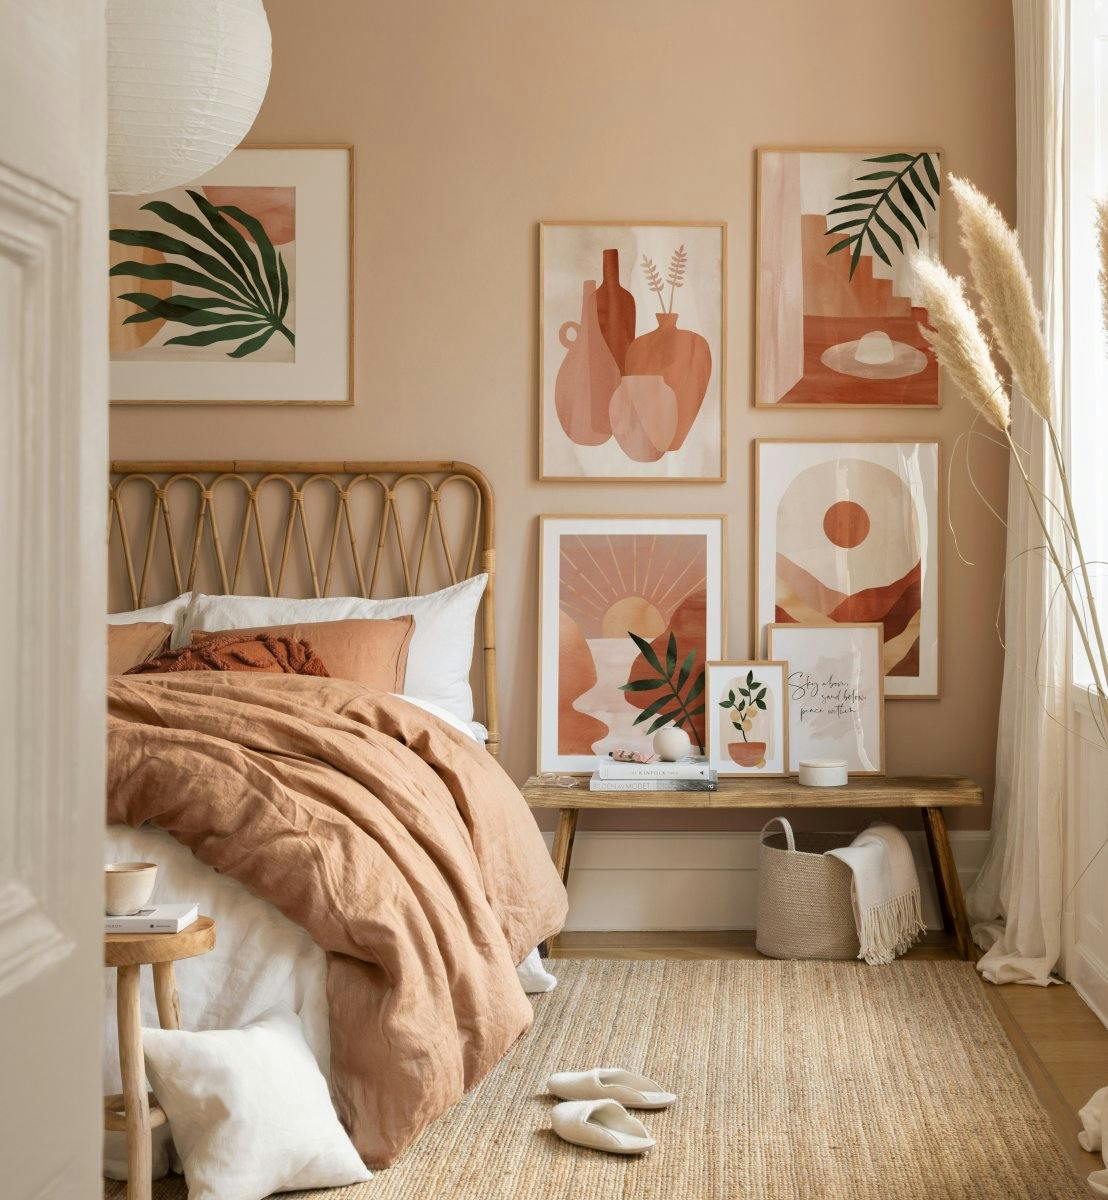 Illustrations in nature colour for bedroom